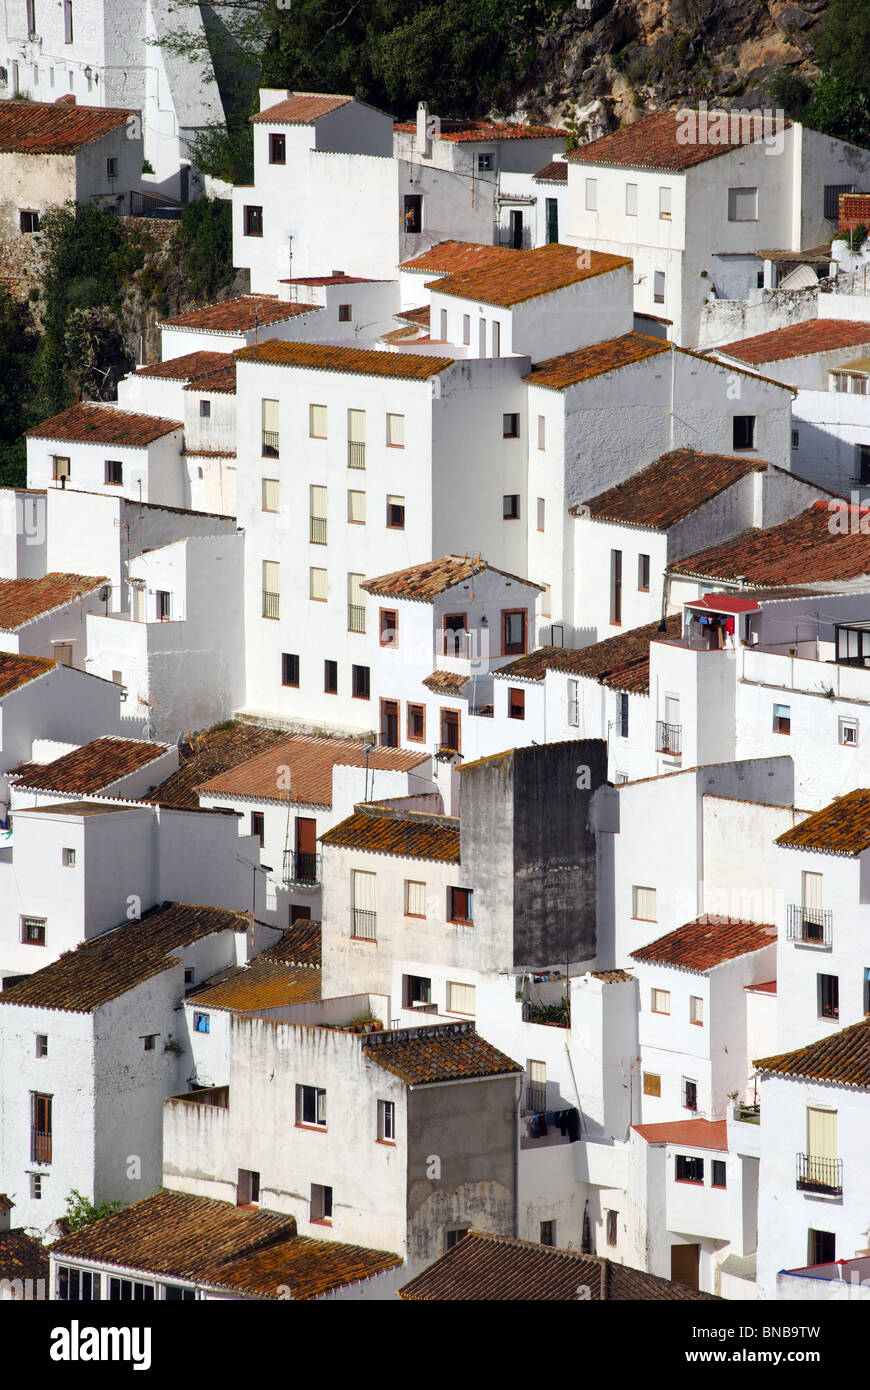 View of the town, Casares, Malaga Province, Andalucia, Spain, Western Europe. Stock Photo